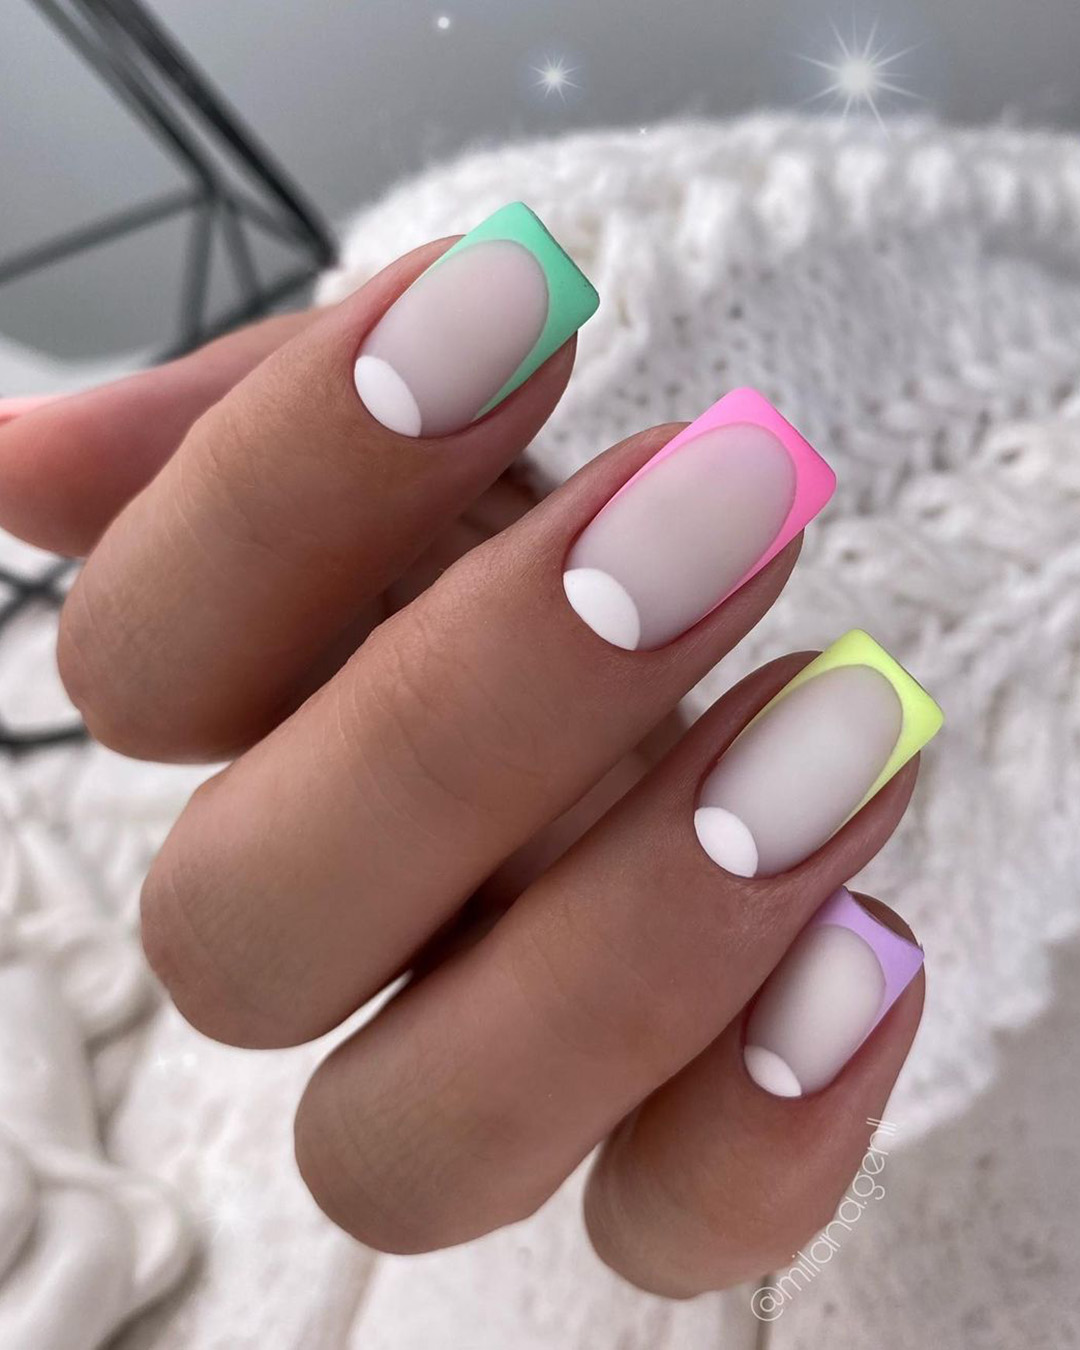 french wedding nails matte with colorful tips milana.gen11